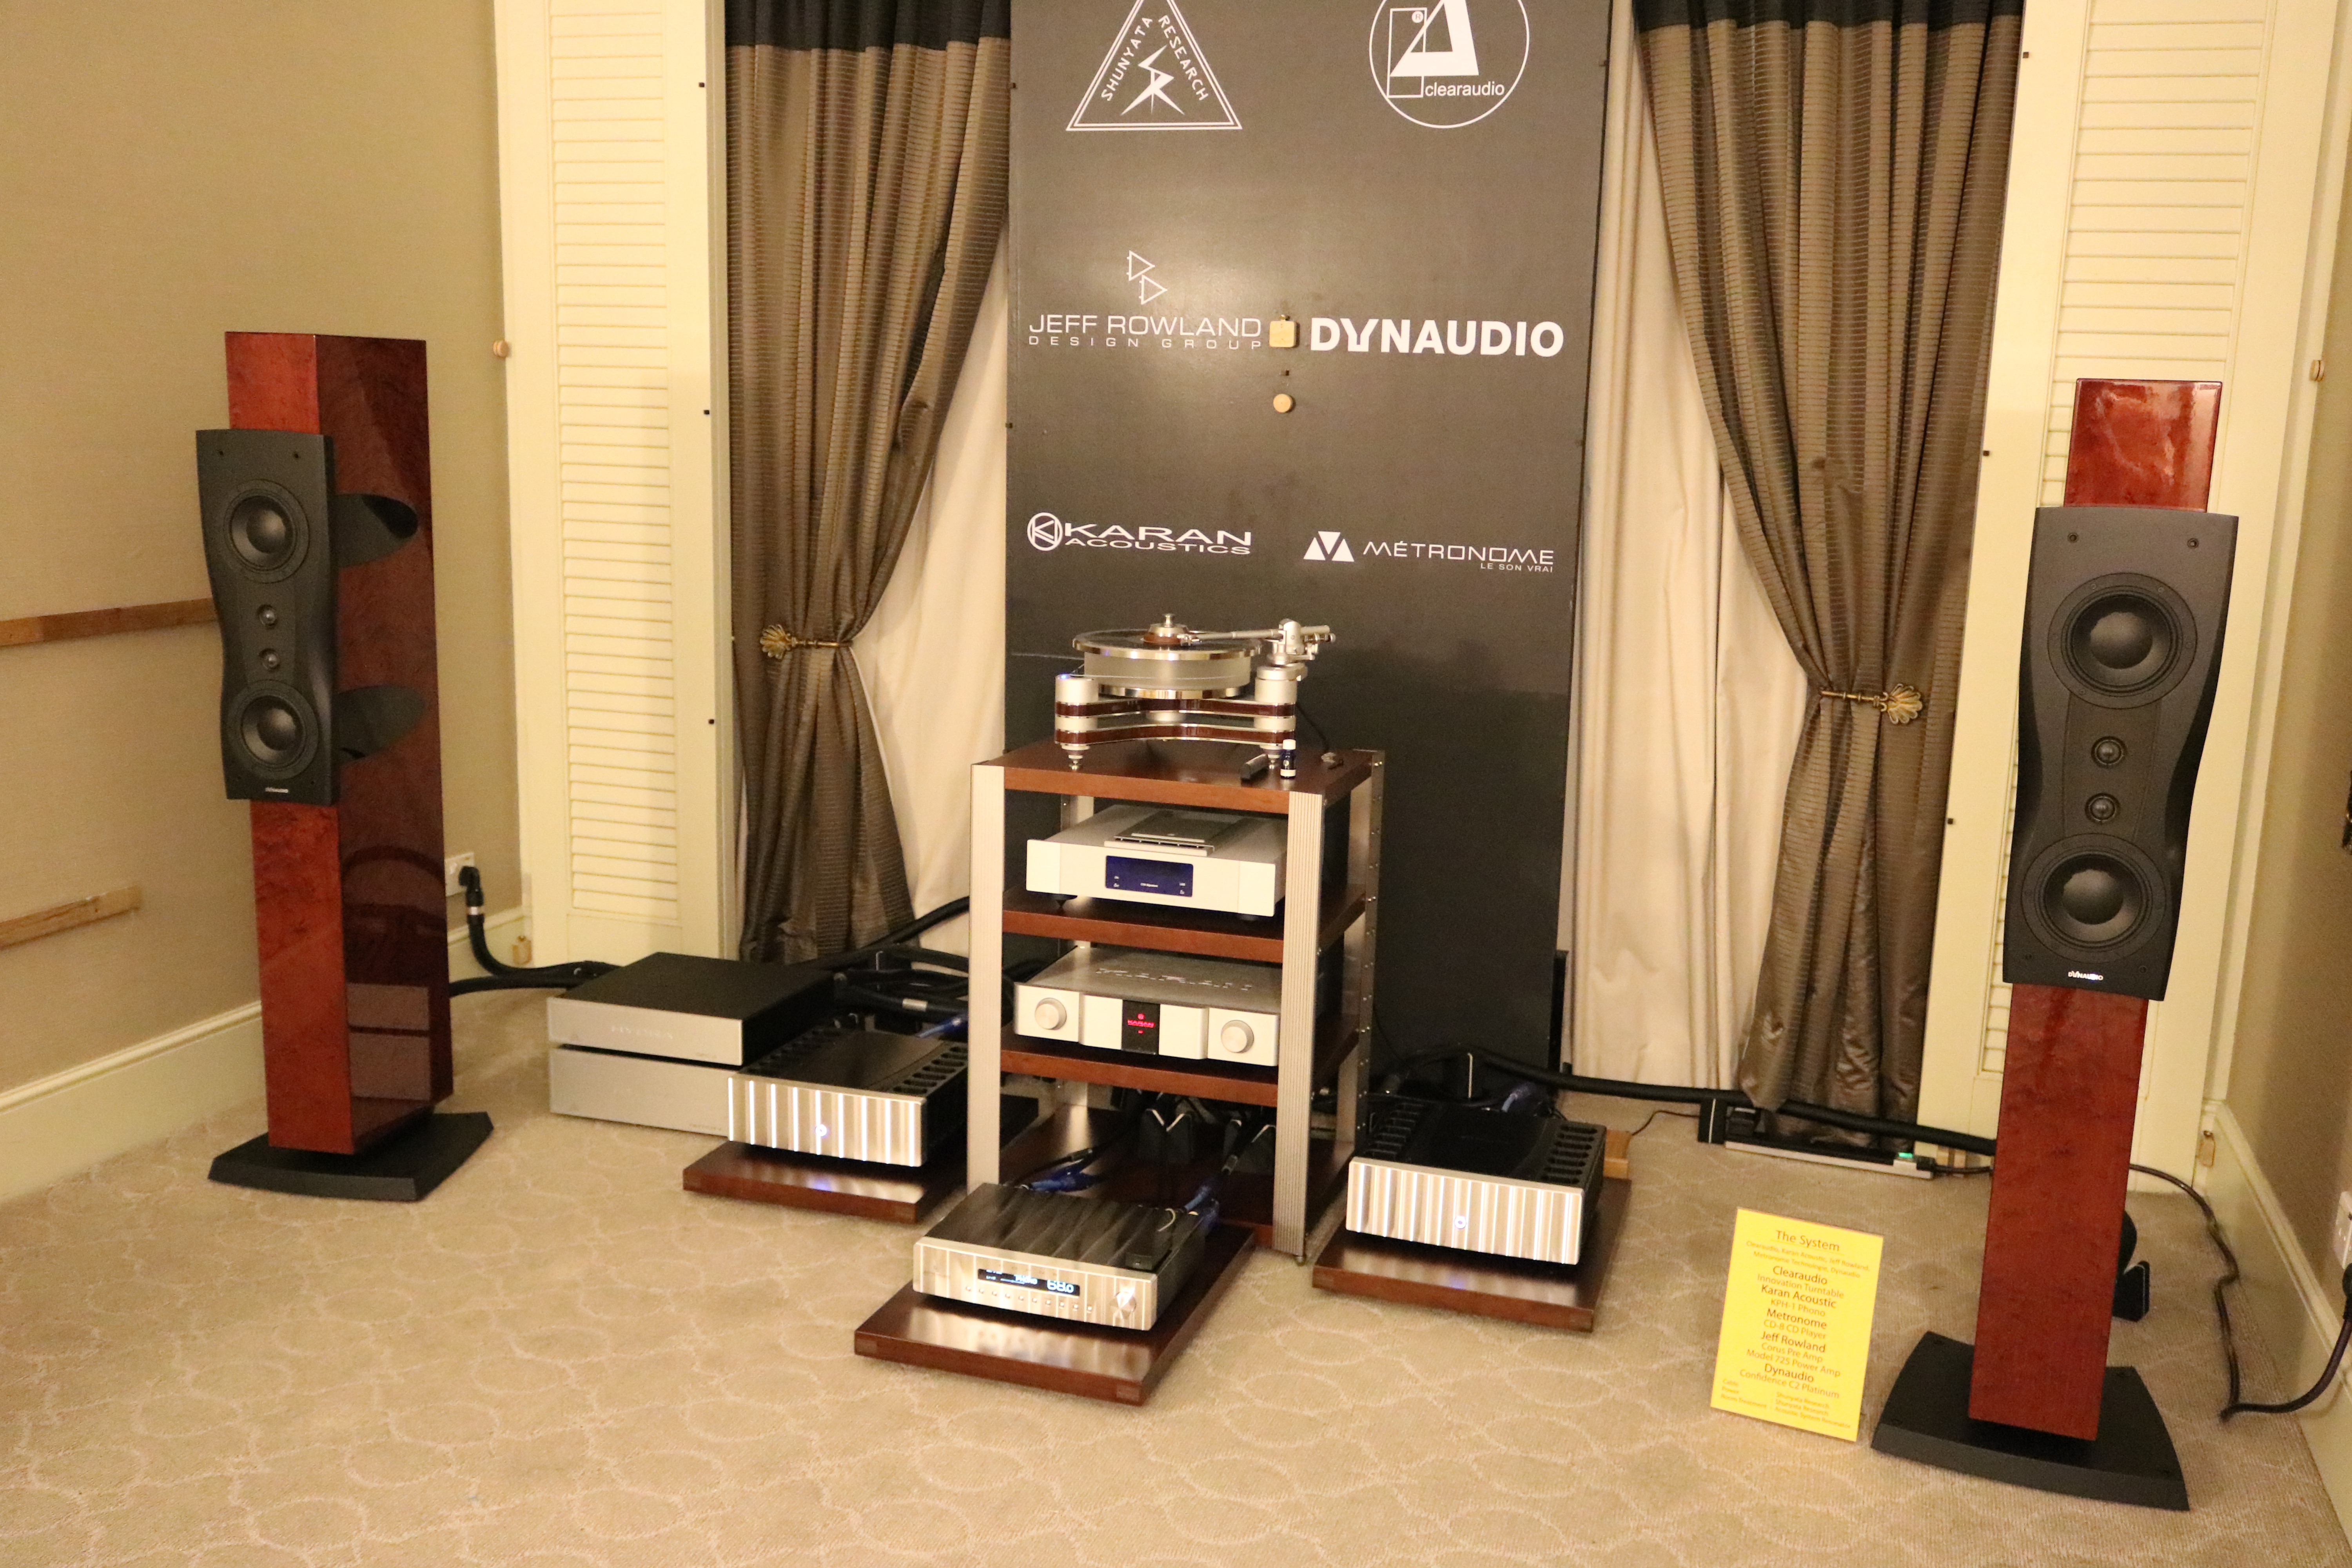 Jeff Rowland, Dynaudio and Clearaudio turntable in the CMY room.